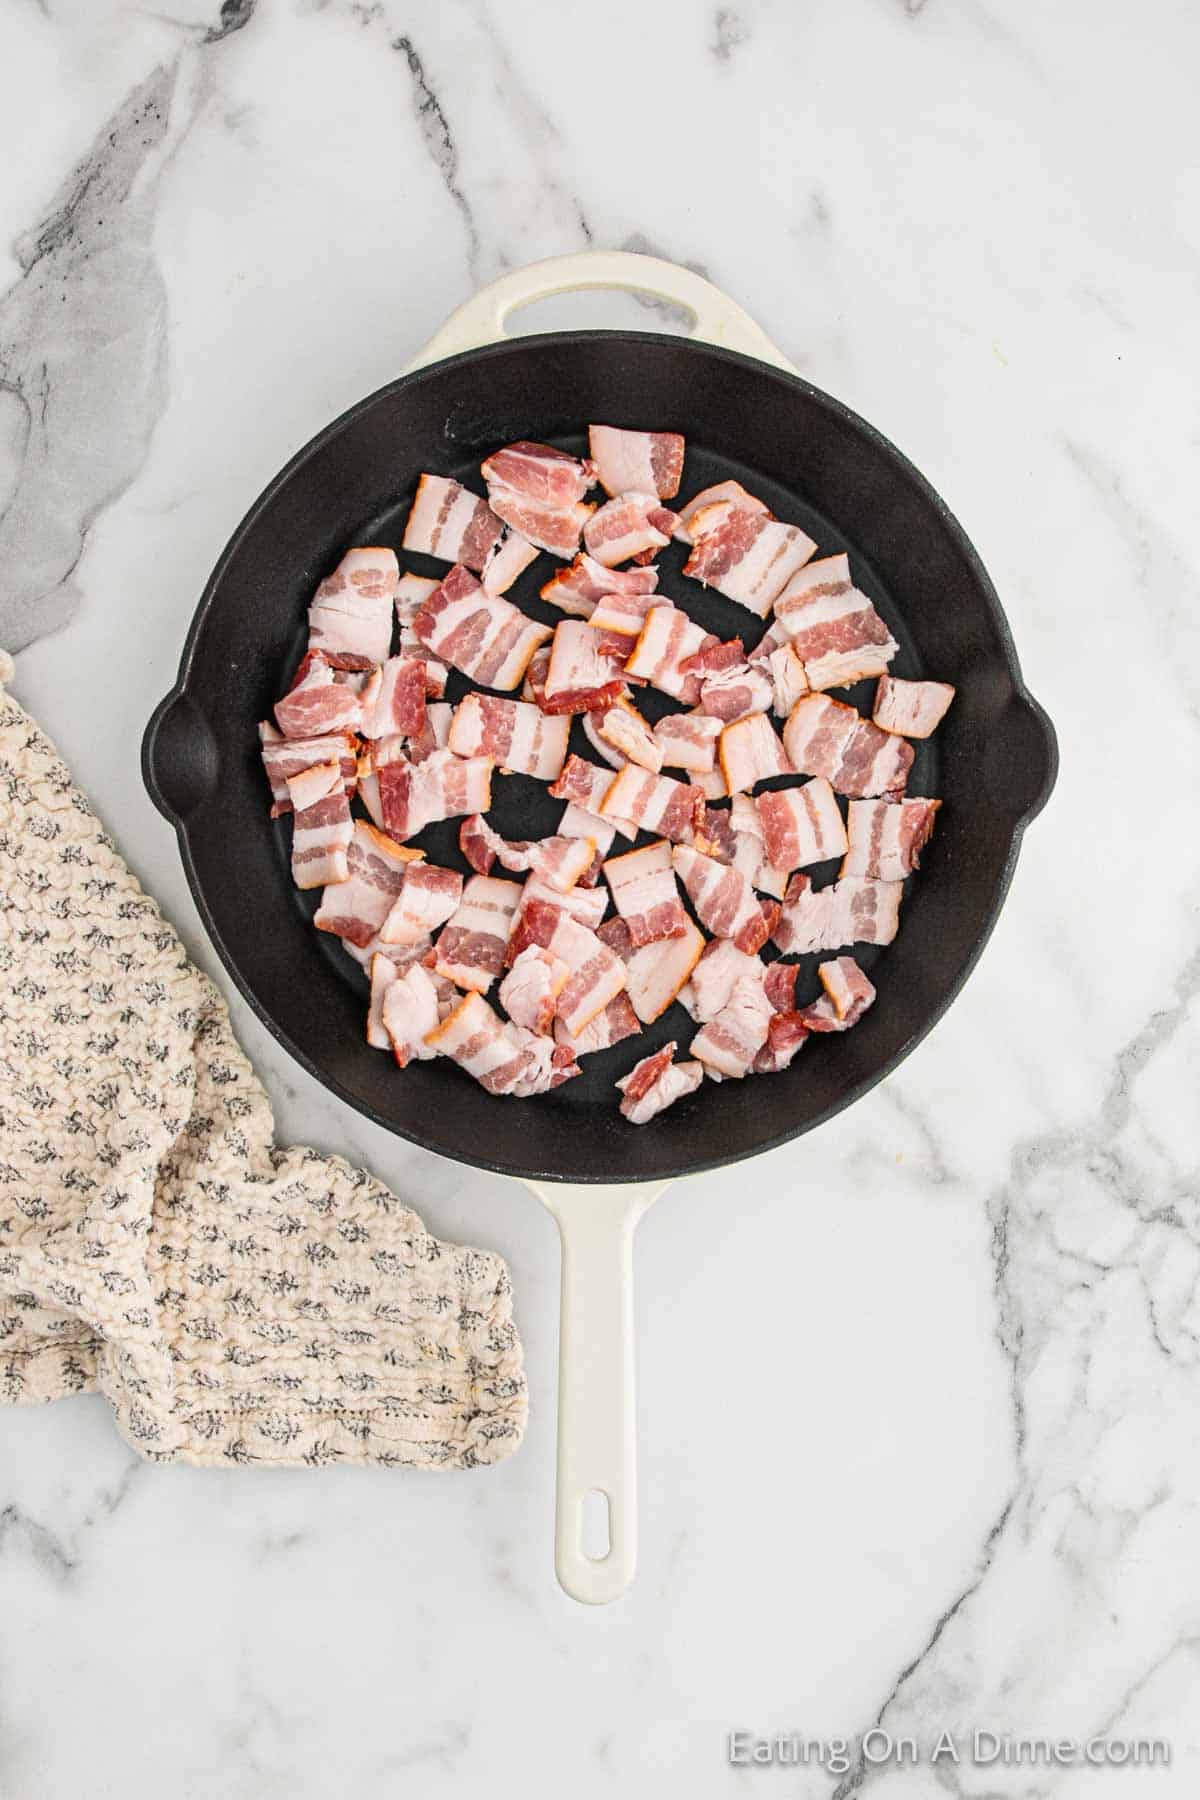 Cooking bacon in a cast iron skillet